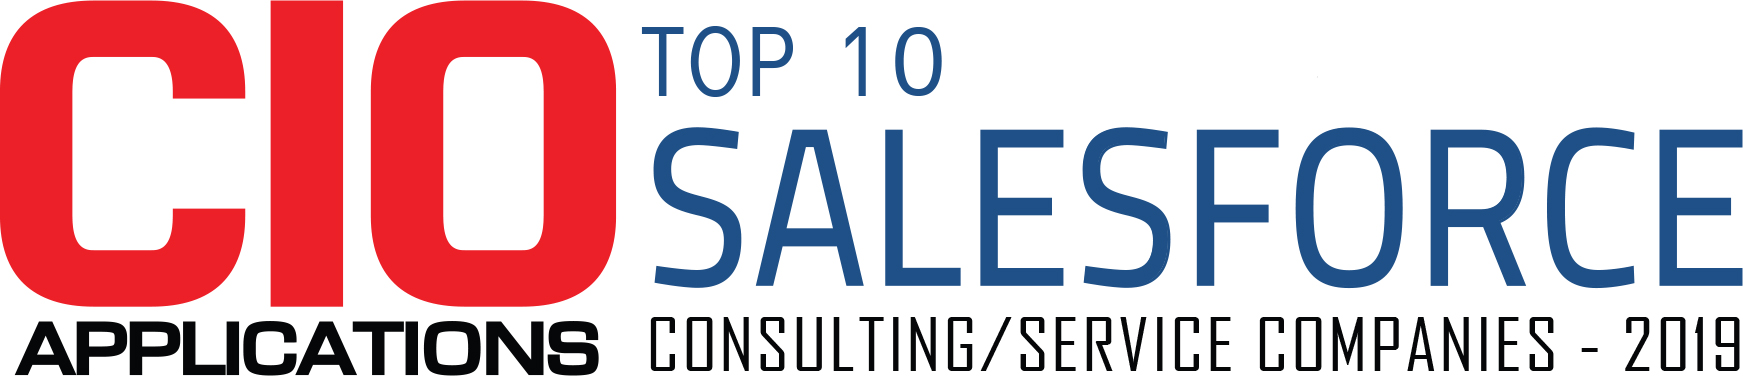 Top 10 Salesforce Consulting/Services Companies - 2019